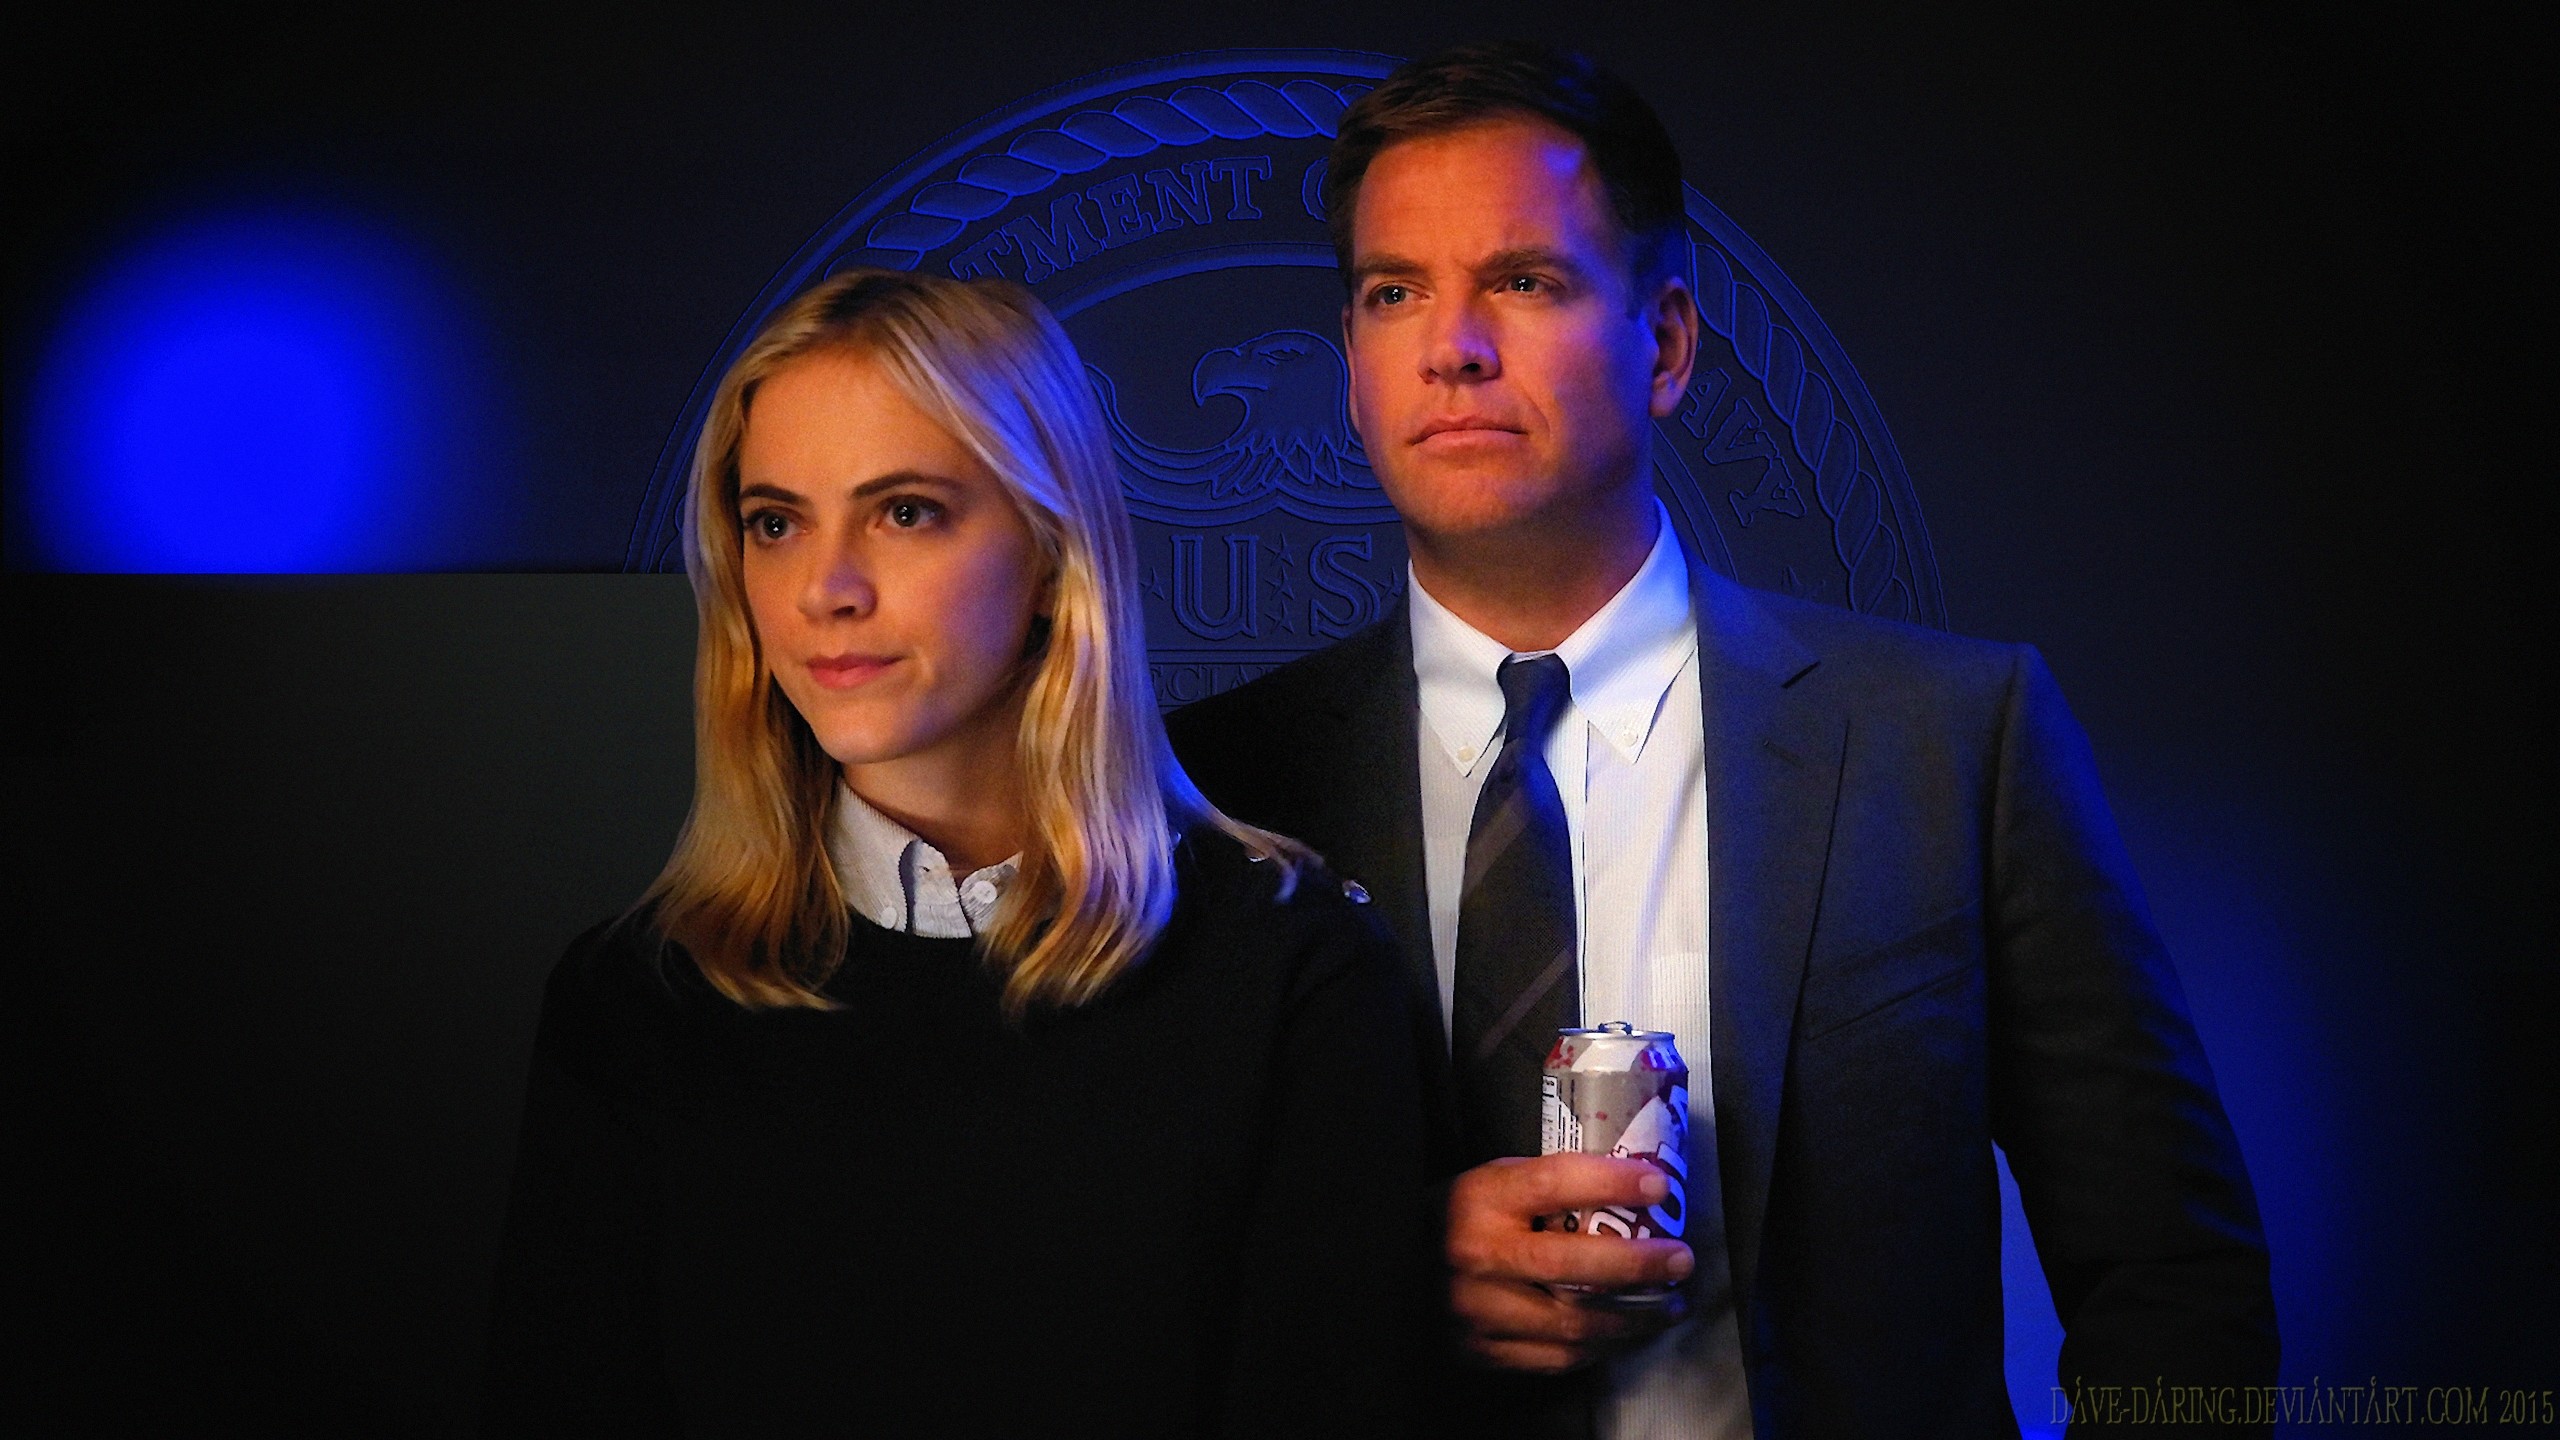 2560x1440 ... NCIS Ellie and Tony by Dave-Daring